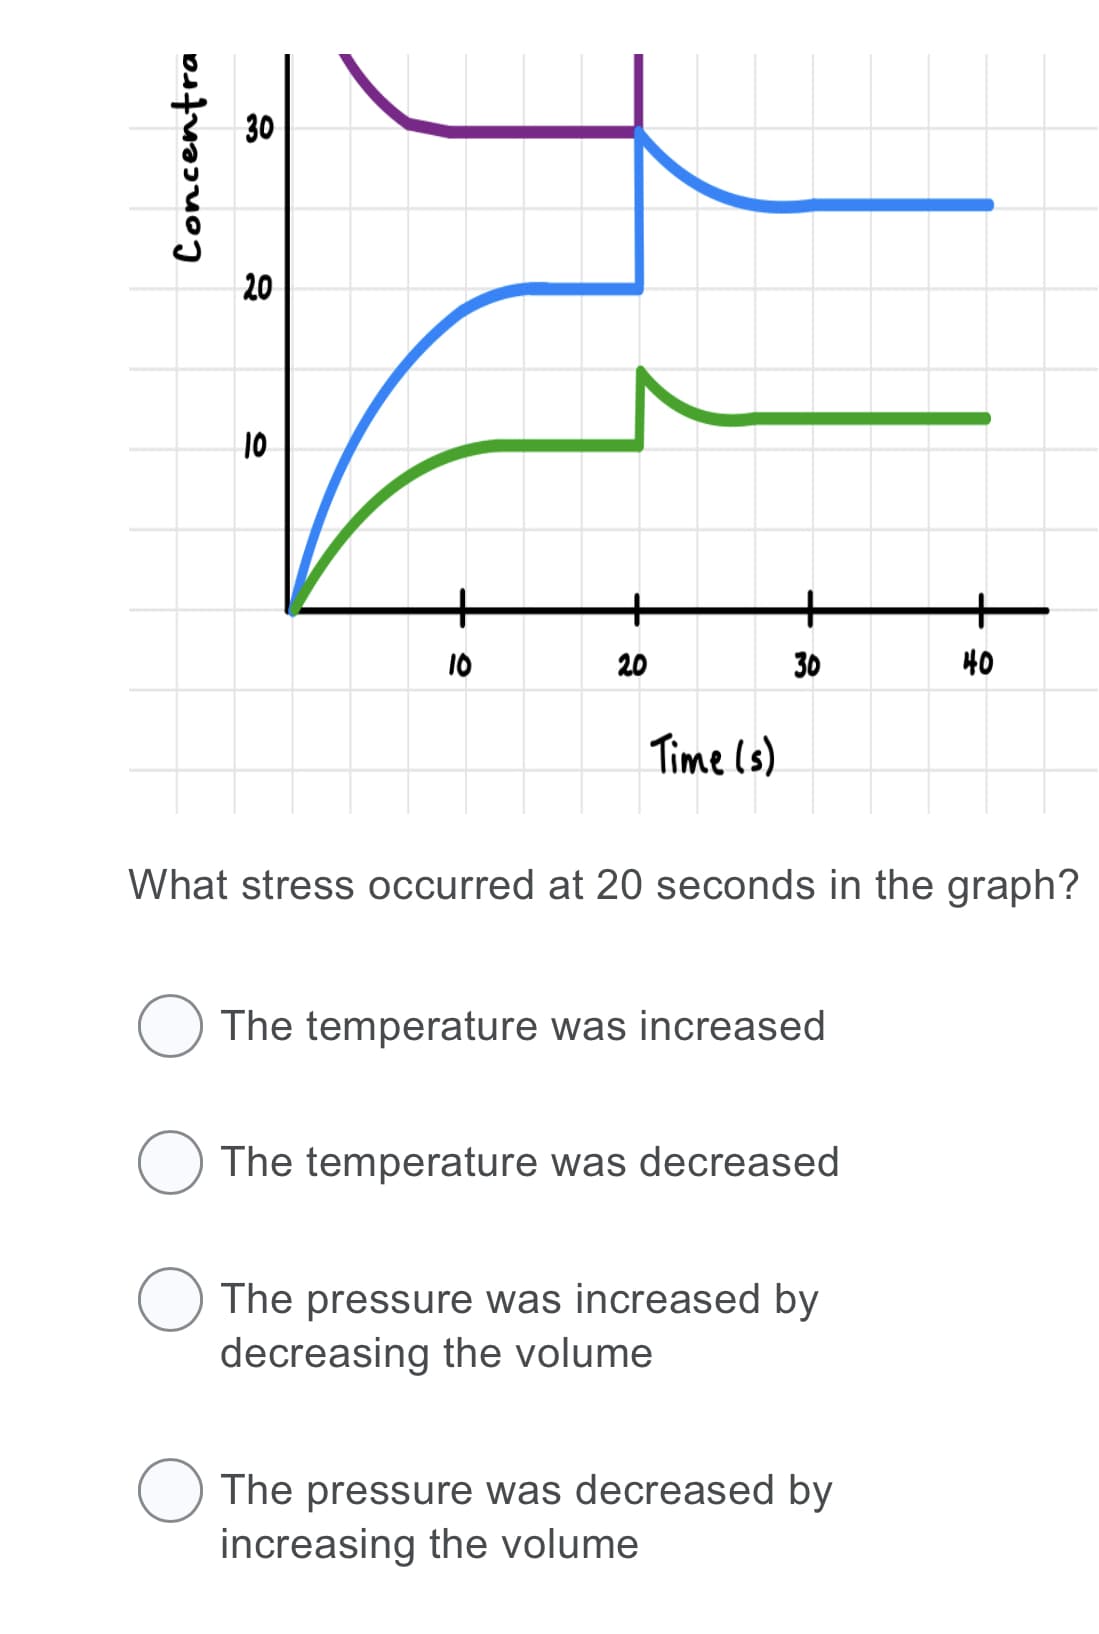 30
20
10
+
+
10
20
30
40
Time (s)
What stress occurred at 20 seconds in the graph?
The temperature was increased
O The temperature was decreased
O The pressure was increased by
decreasing the volume
O The pressure was decreased by
increasing the volume
Concentra
